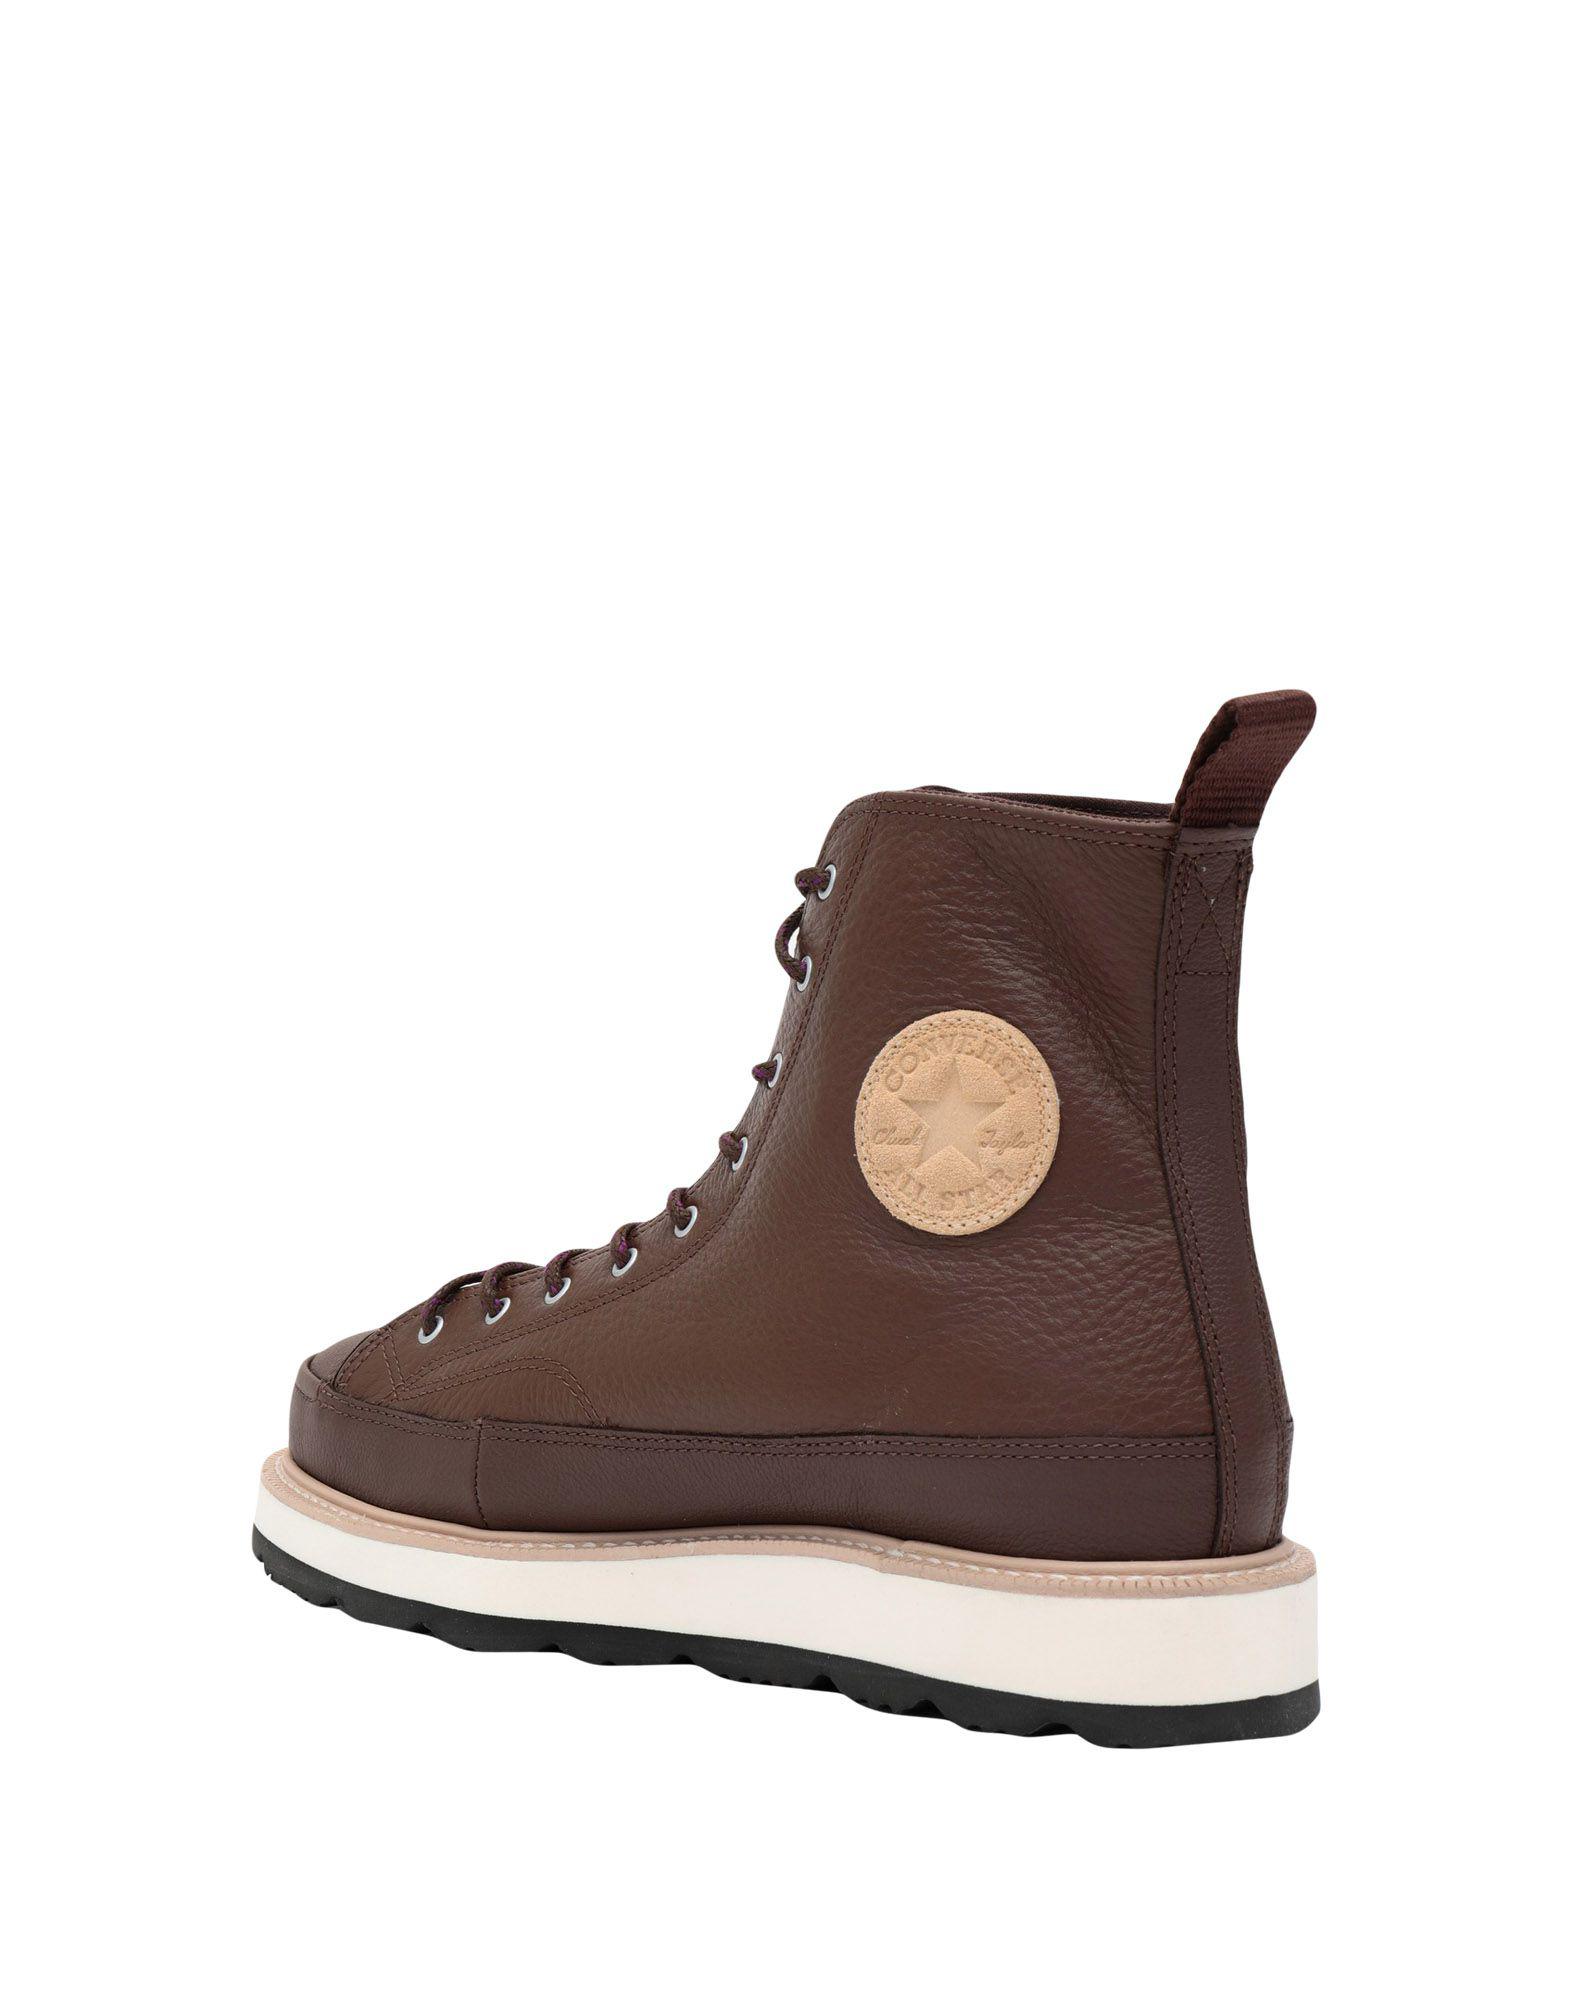 mens brown leather converse boots,www.autoconnective.in